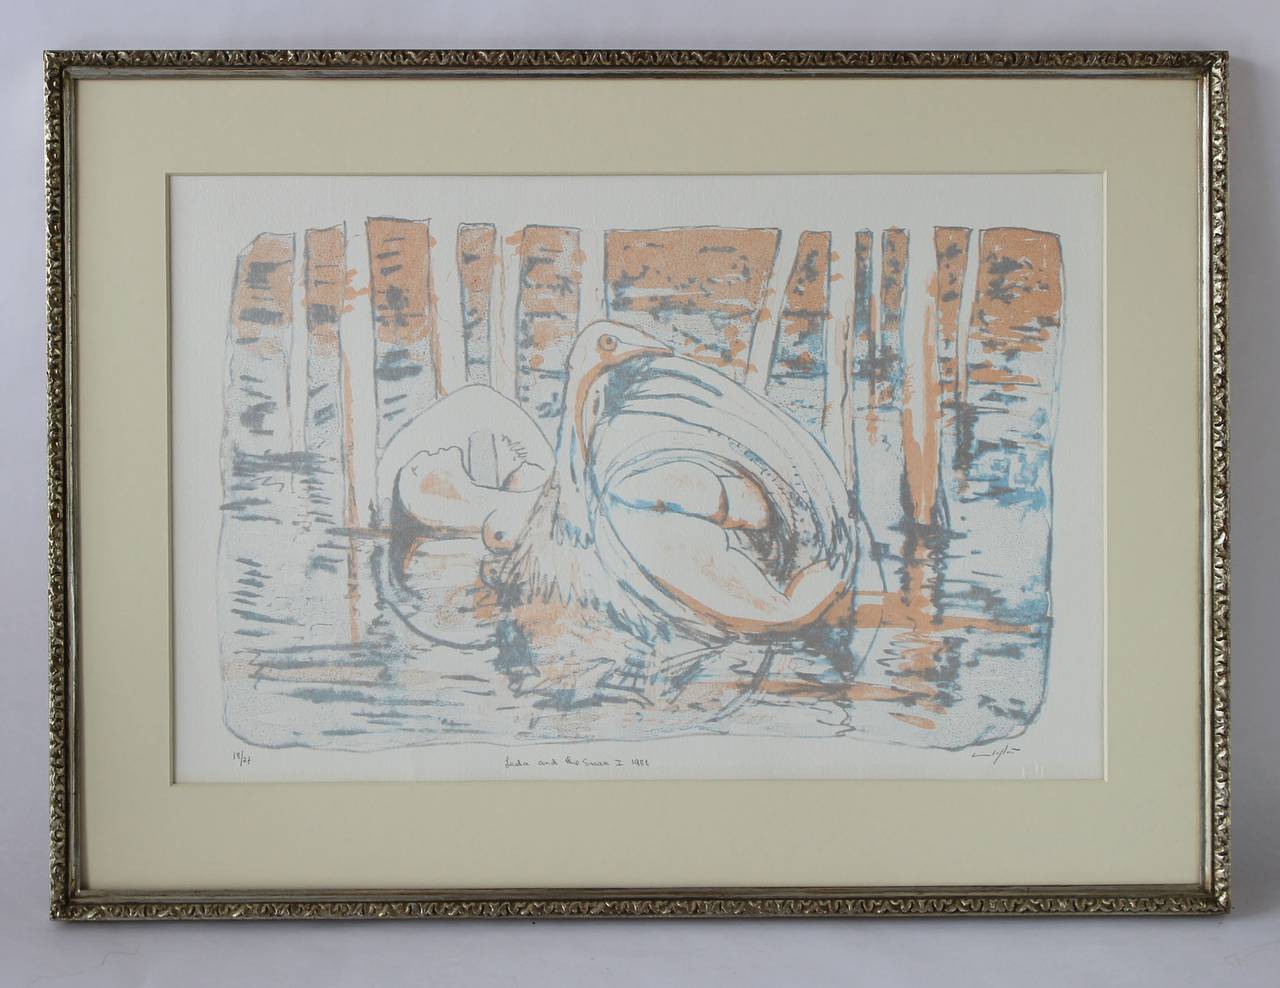 A multi-colored, matted and gilt framed lithograph by Australian artist Clifton Pugh (1924-1990); edition 18/27, 1988.